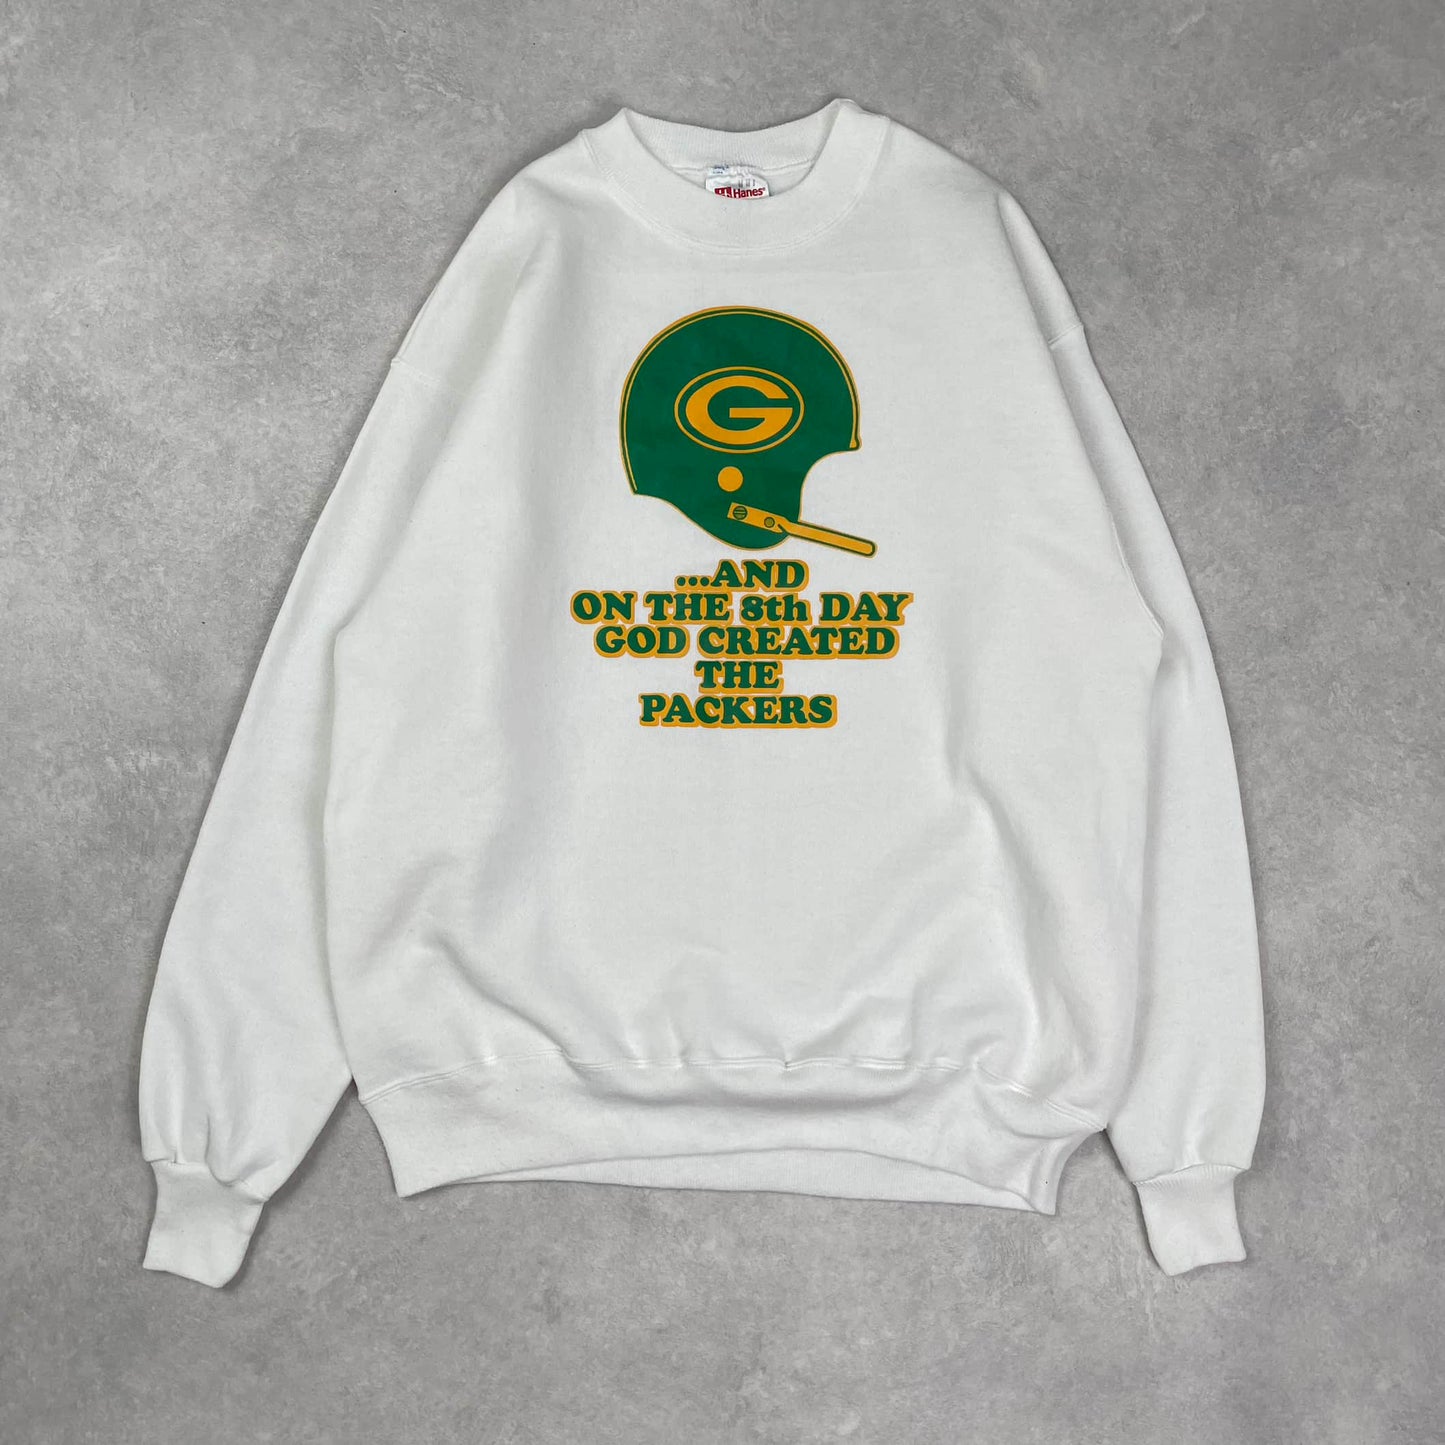 Vintage Sweater Hanes “And on the 8th Day God Created The Packers”